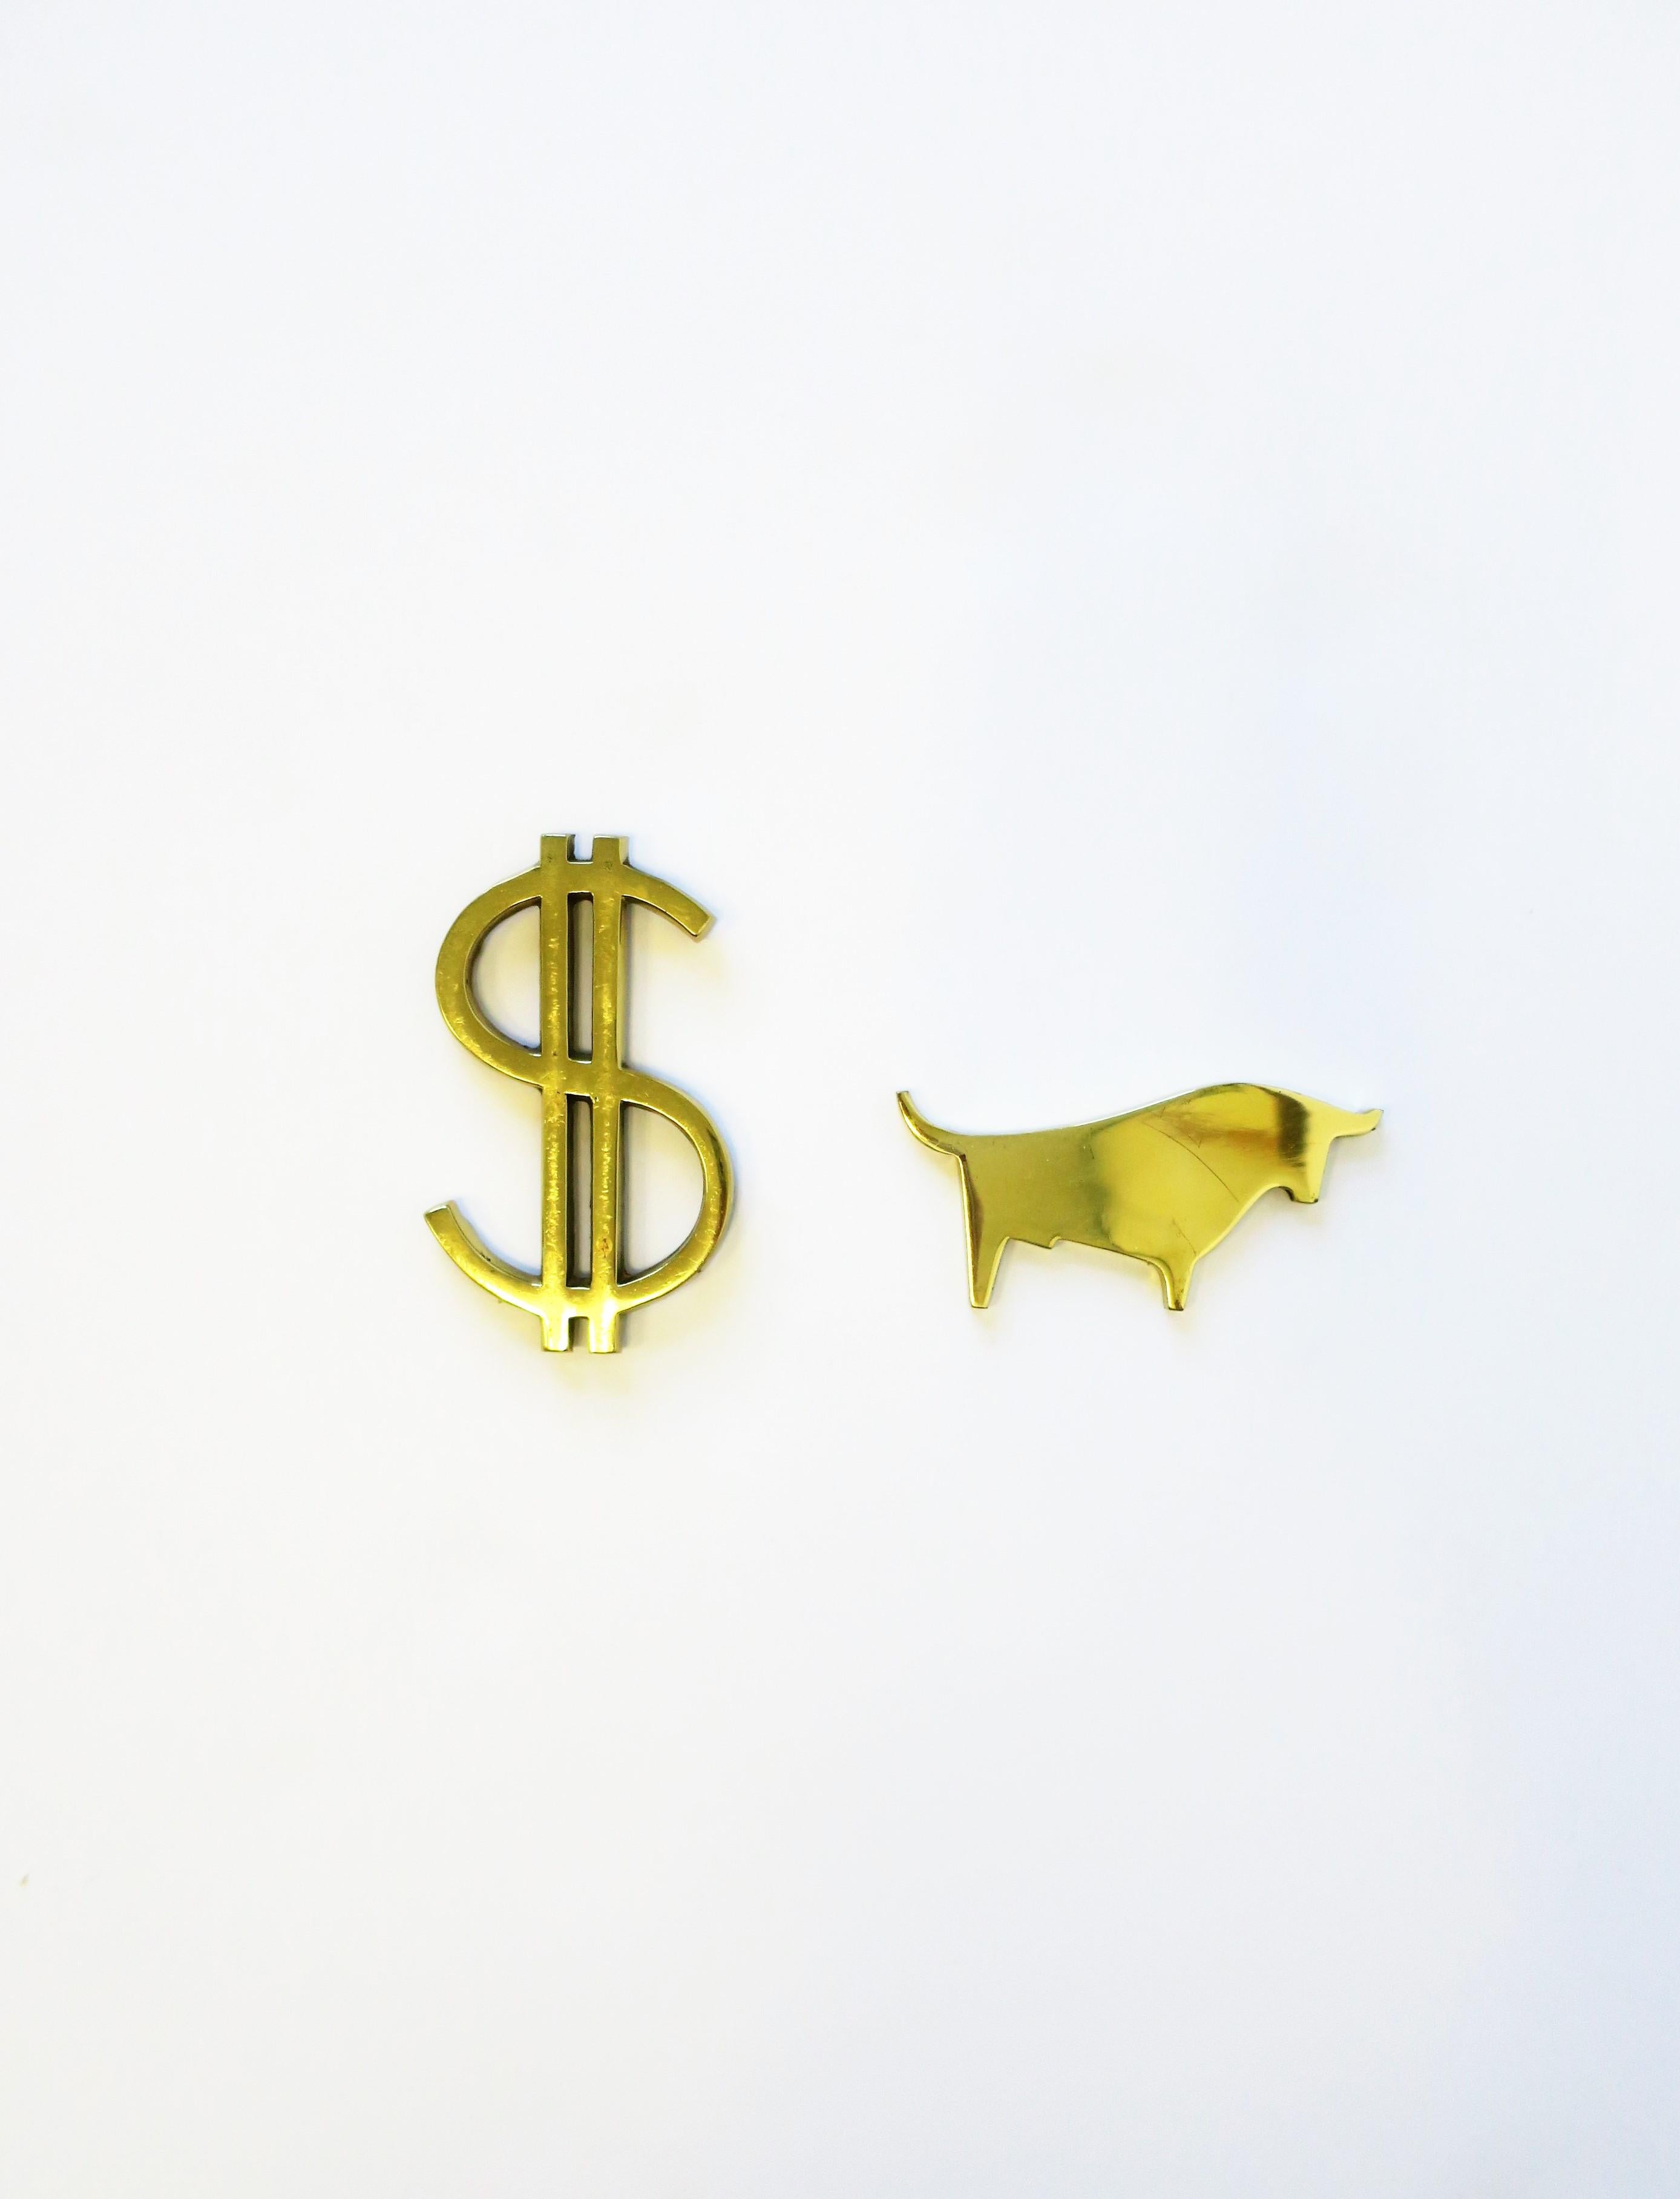 Japanese Wall Street Dollar Sign and Bull Brass Desk Paperweights For Sale